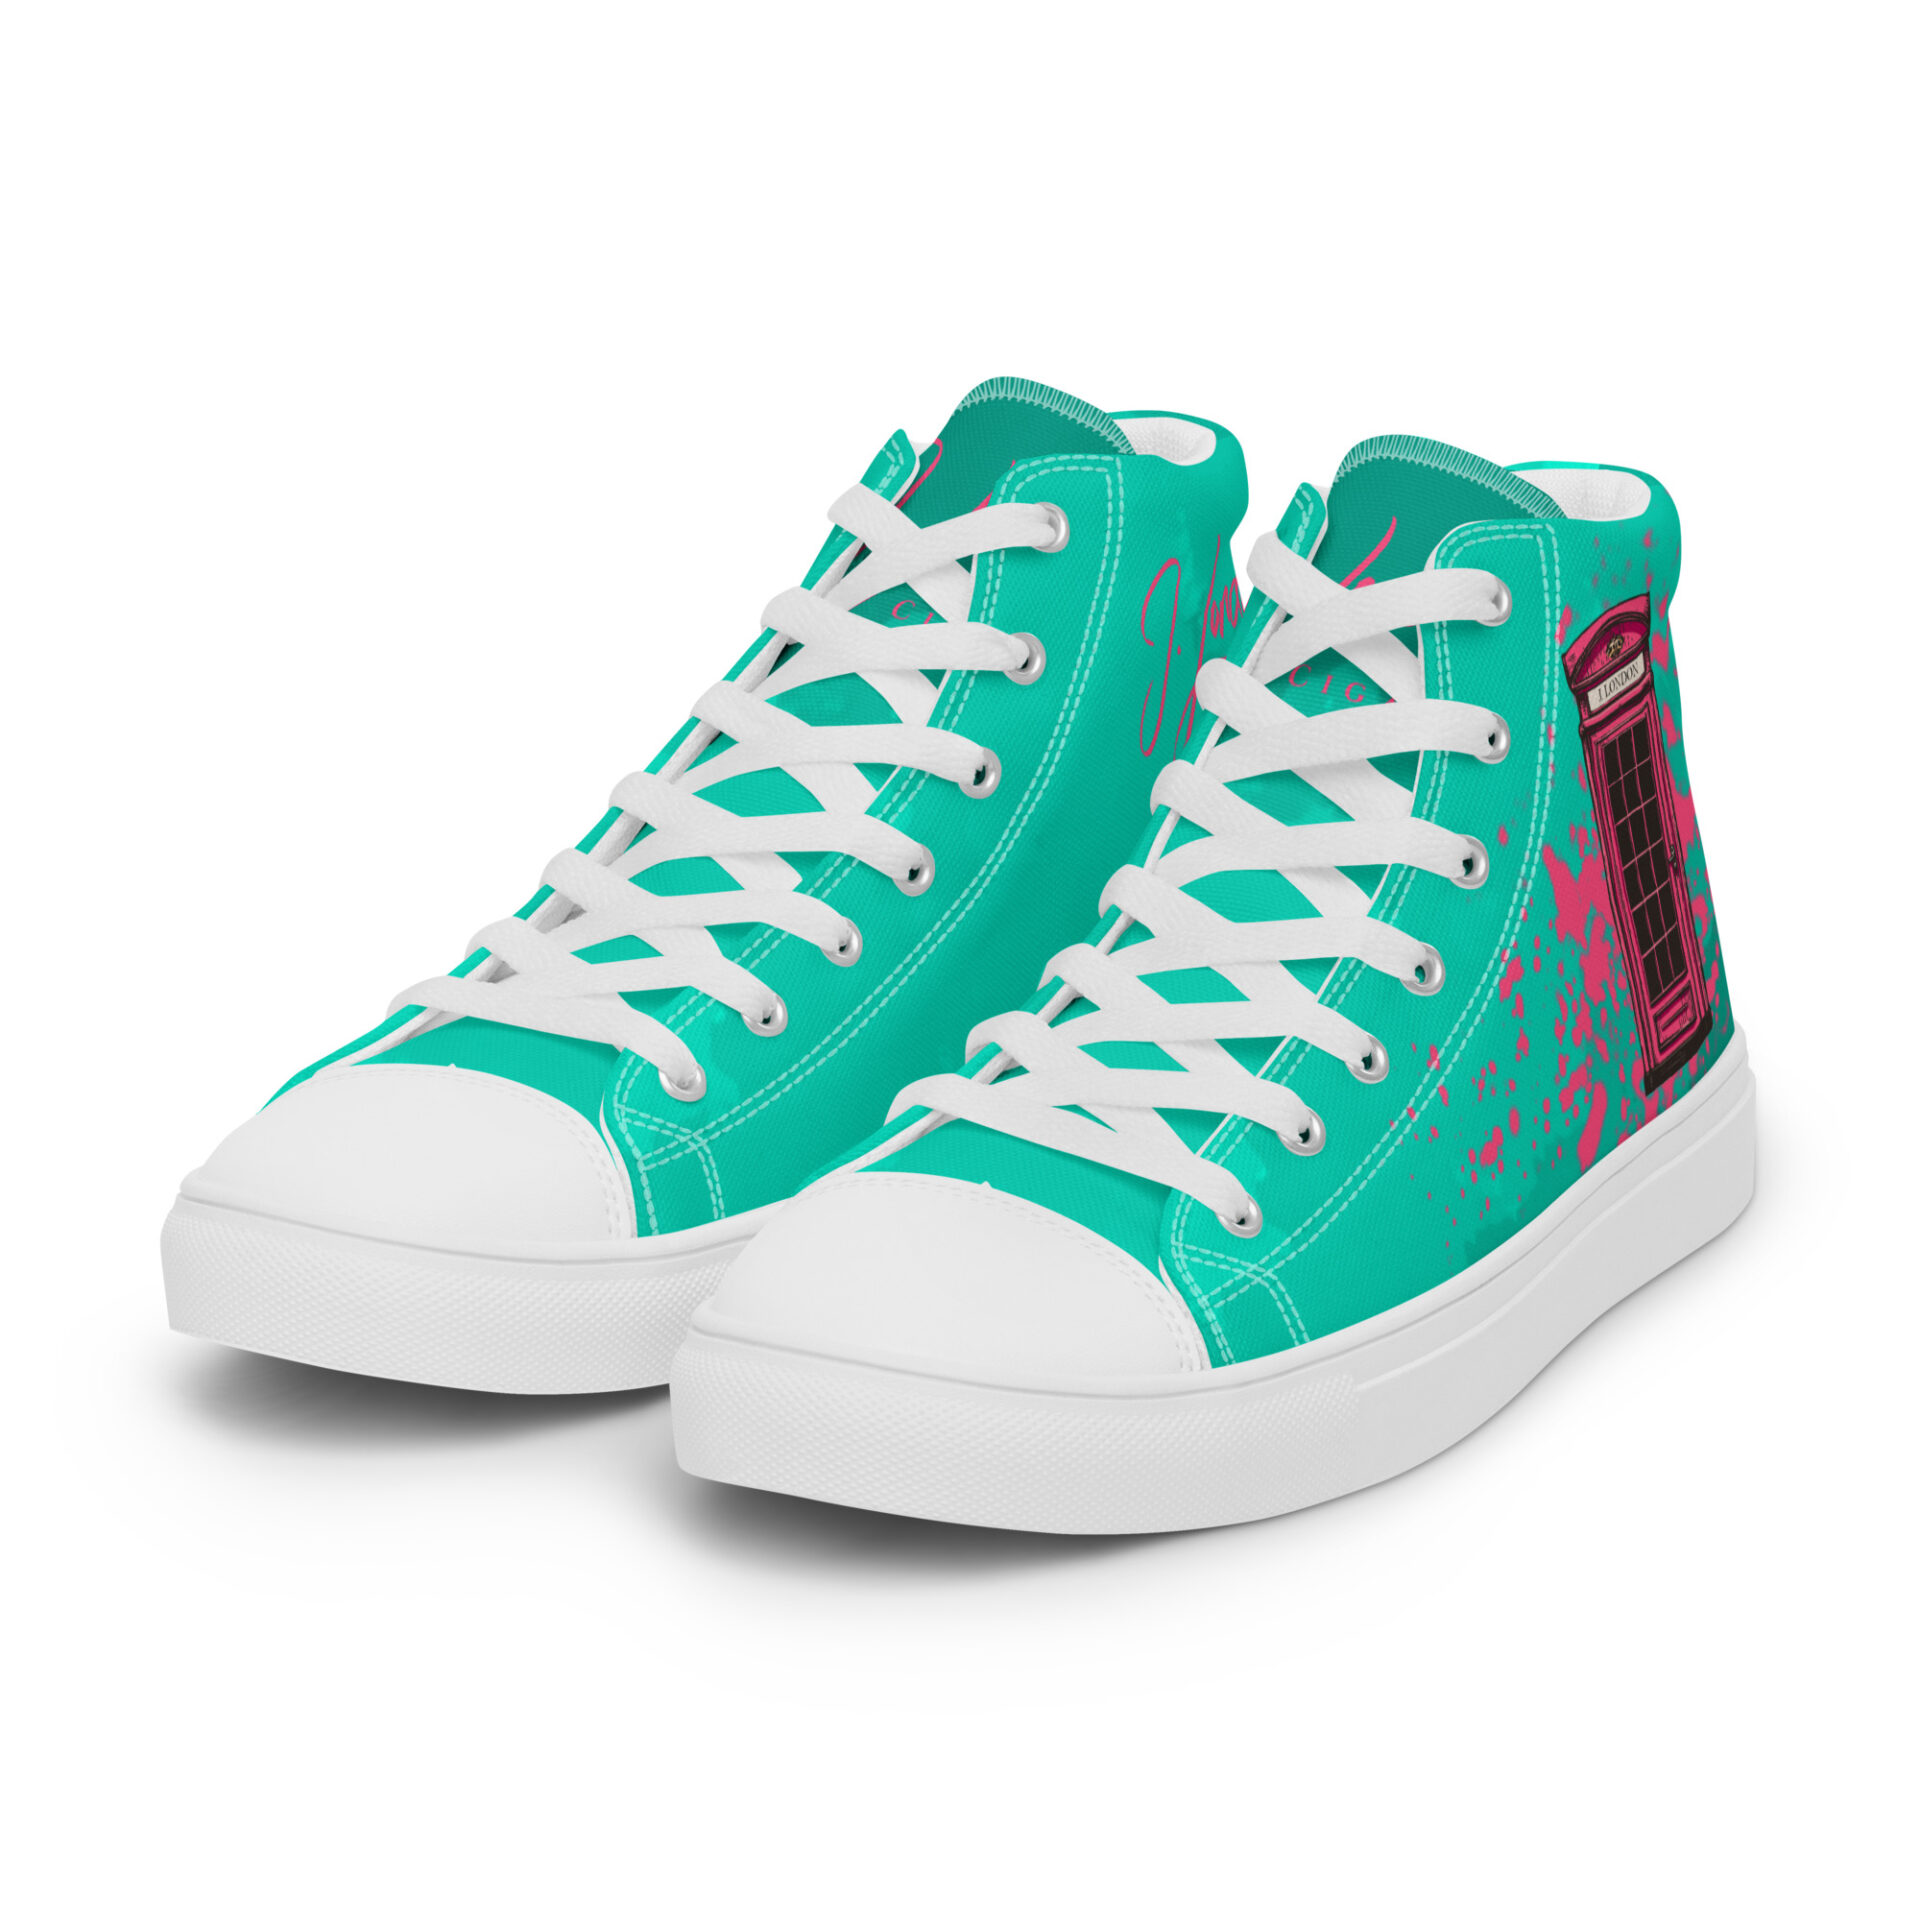 Telephone Booth Series Canvas High Top Sneakers - J. London Brands